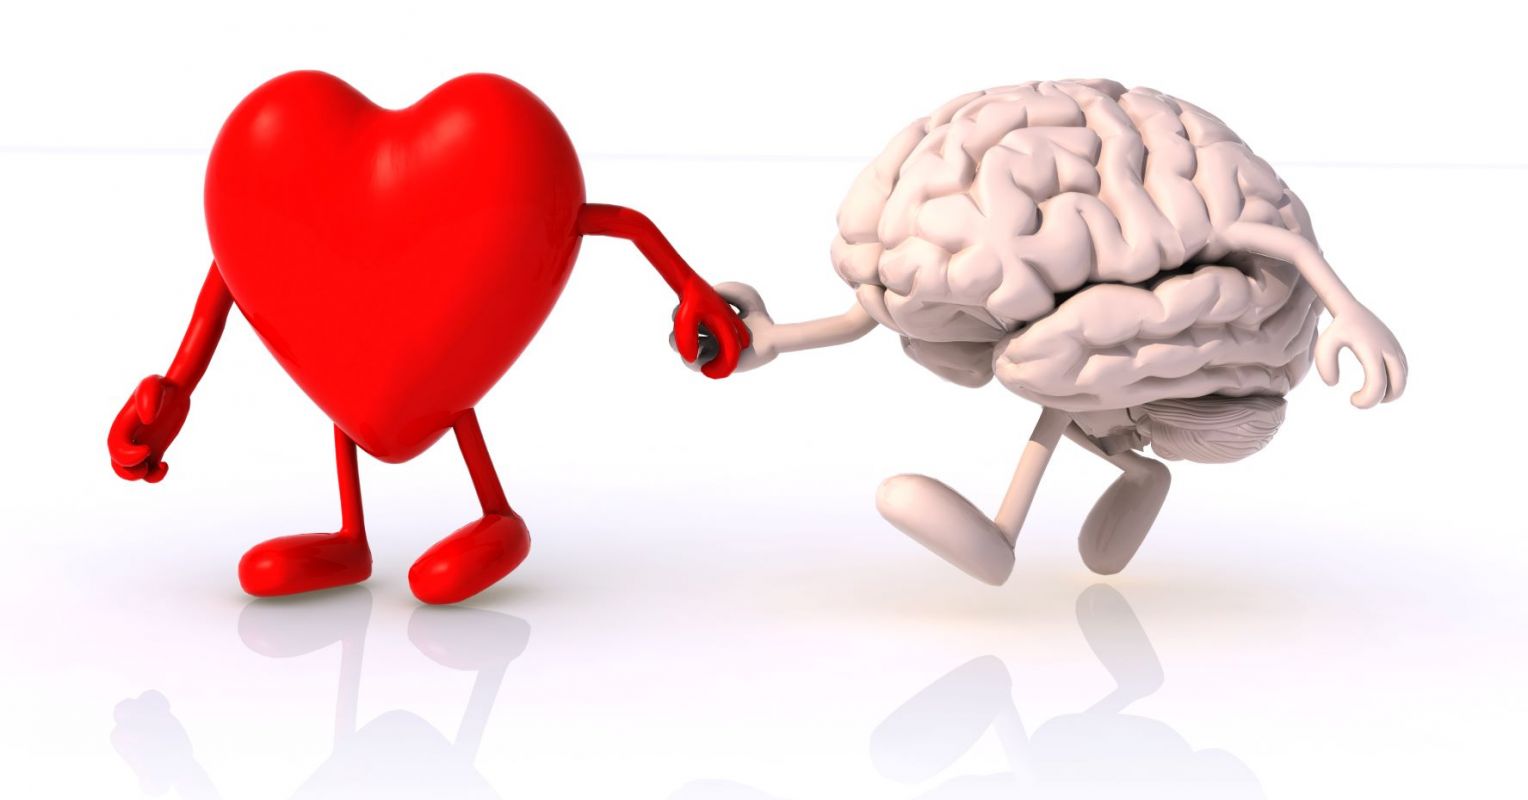 Why Body, Heart, and Mind Are So Important for Well-Being